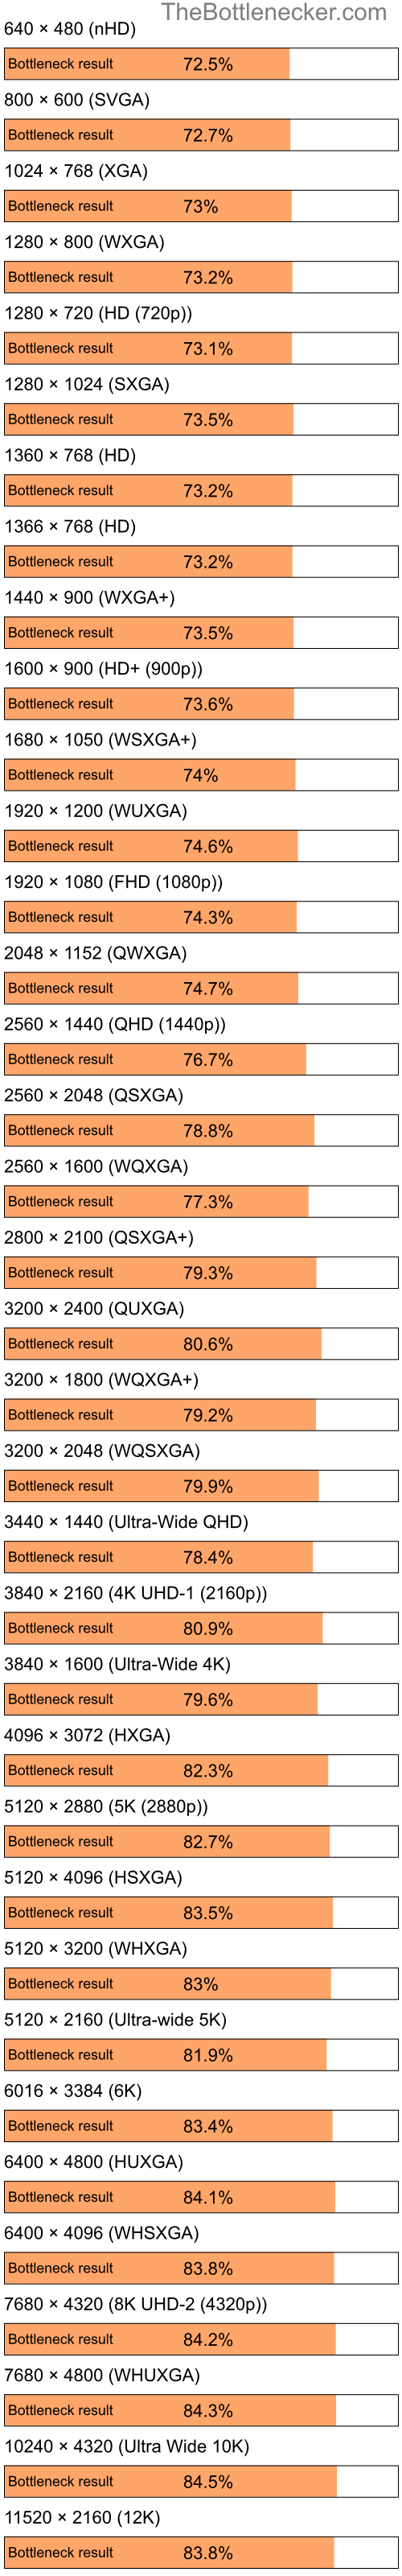 Bottleneck results by resolution for Intel Celeron M 420 and NVIDIA GeForce 9300M G in Graphic Card Intense Tasks